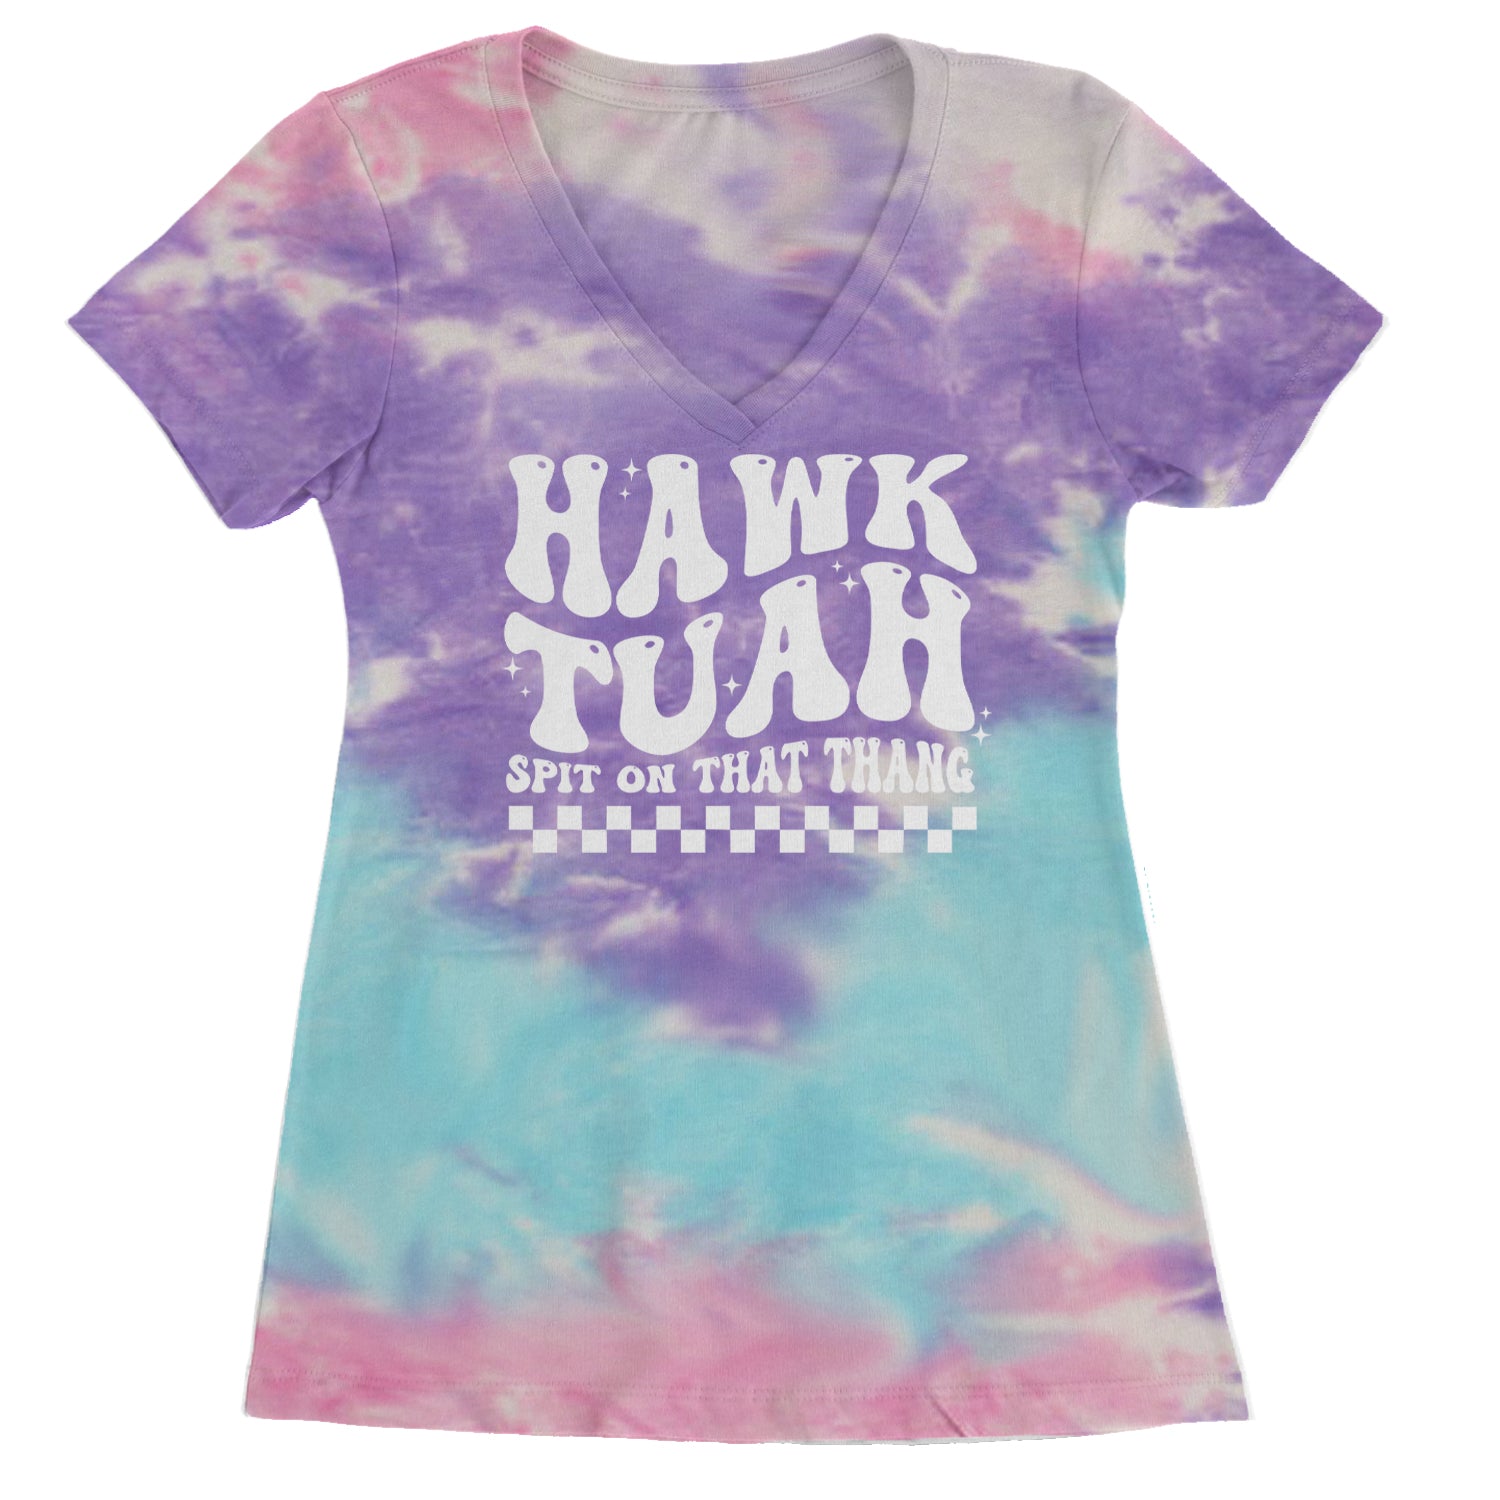 Hawk Tuah Spit On That Thang Ladies V-Neck T-shirt Cotton Candy